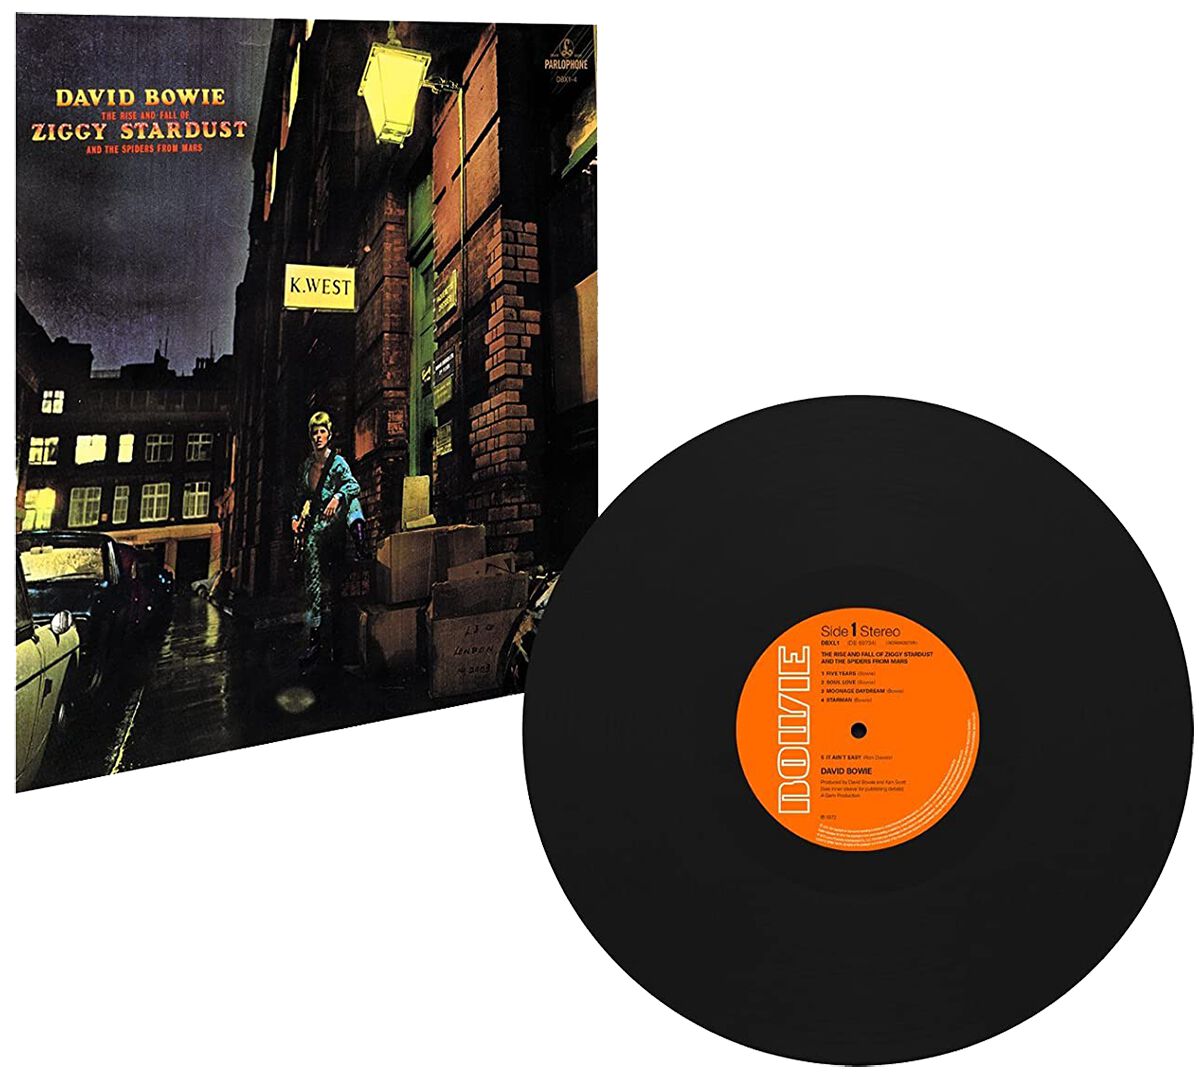 Image of David Bowie The rise and fall of Ziggy Stardust and the spiders from Mars LP Standard